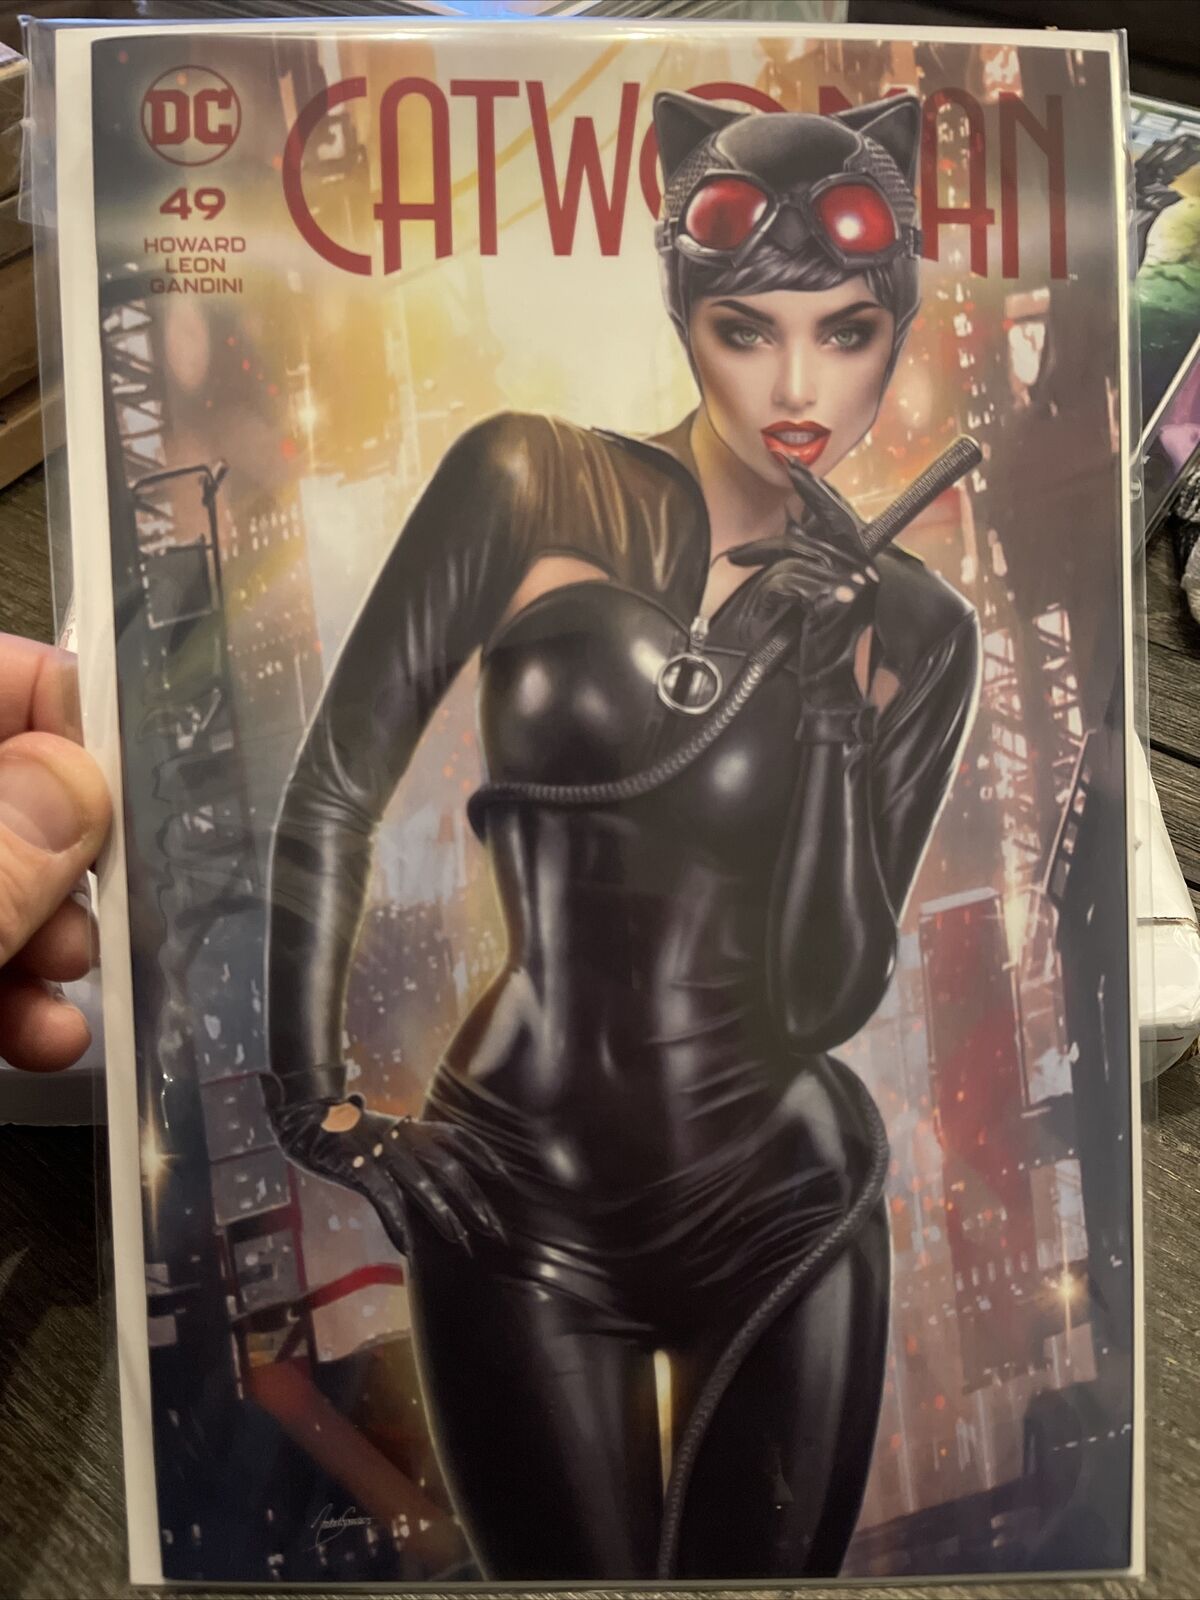 CATWOMAN 49 NATALI SANDERS EXCL VARIANT LIMITED TO 800 COA BATMAN HARELY QUINN